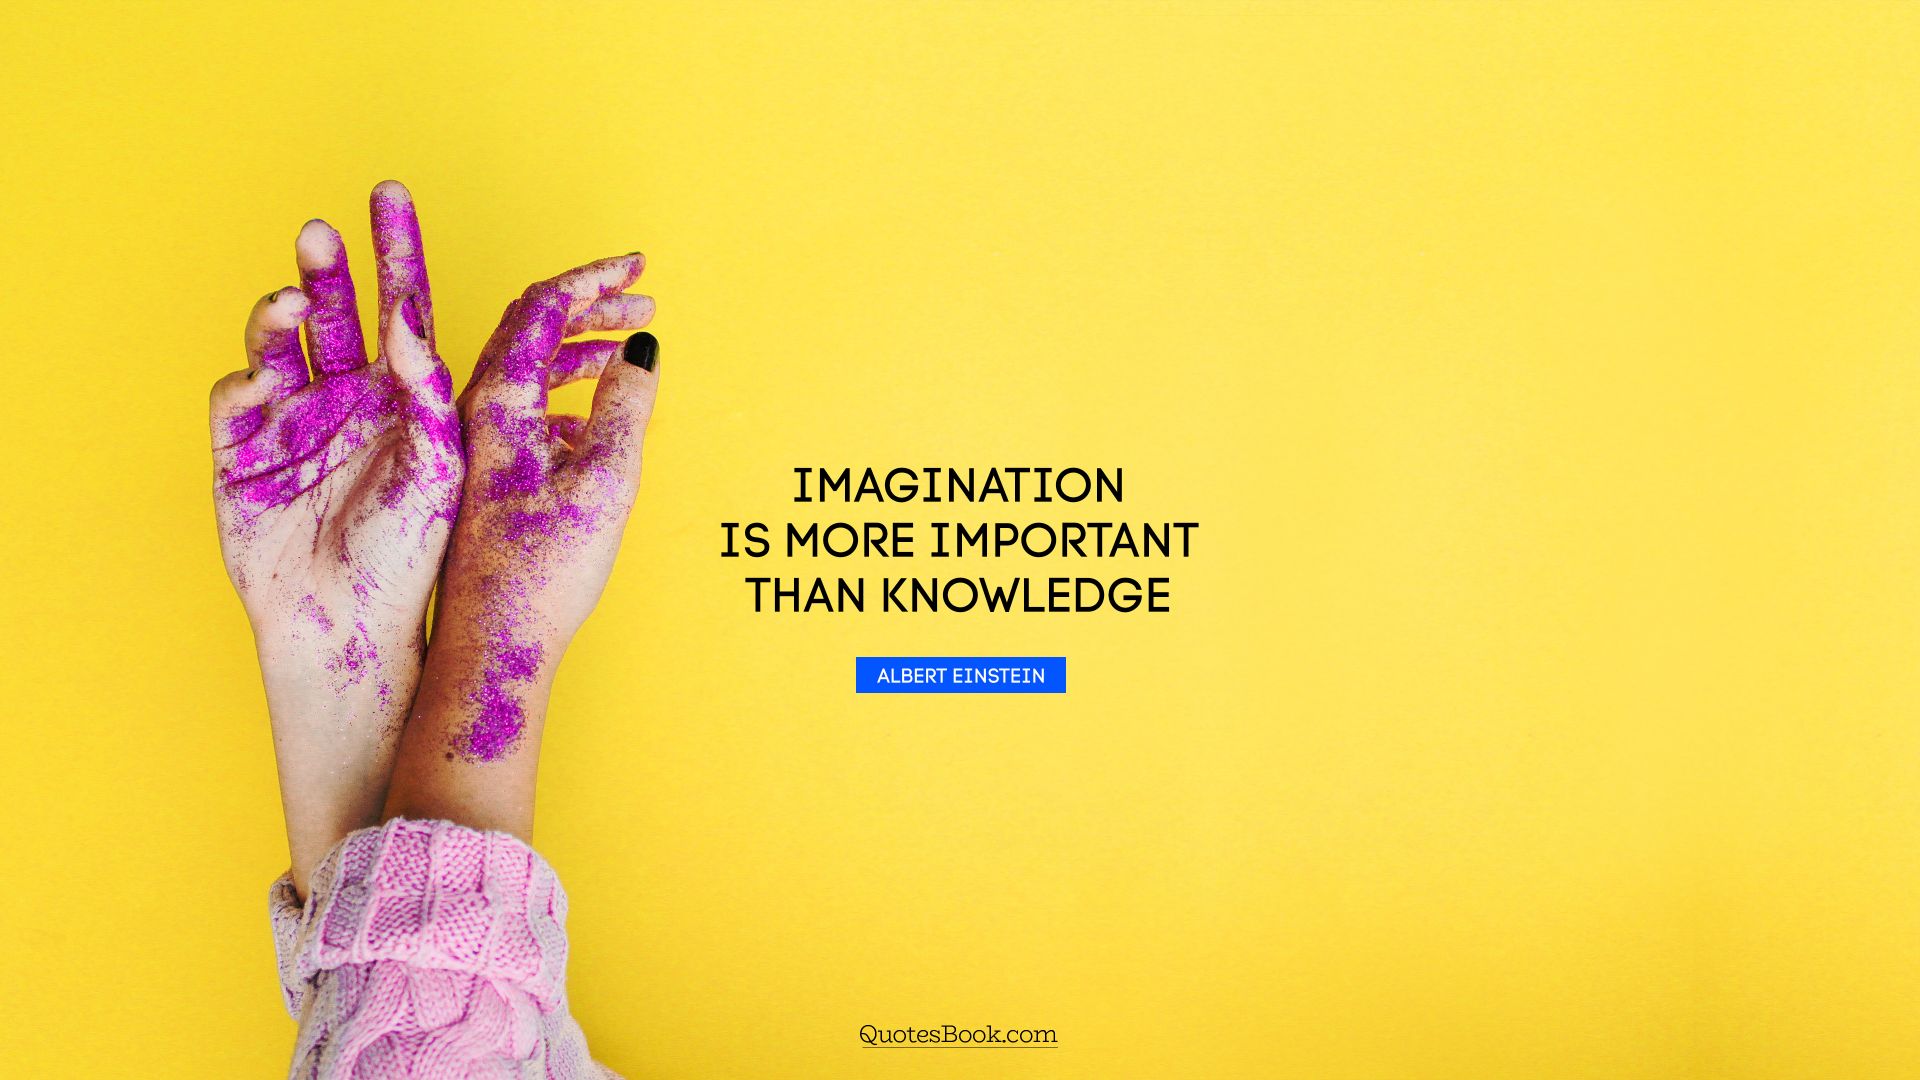 Imagination is more important than knowledge. - Quote by Albert Einstein